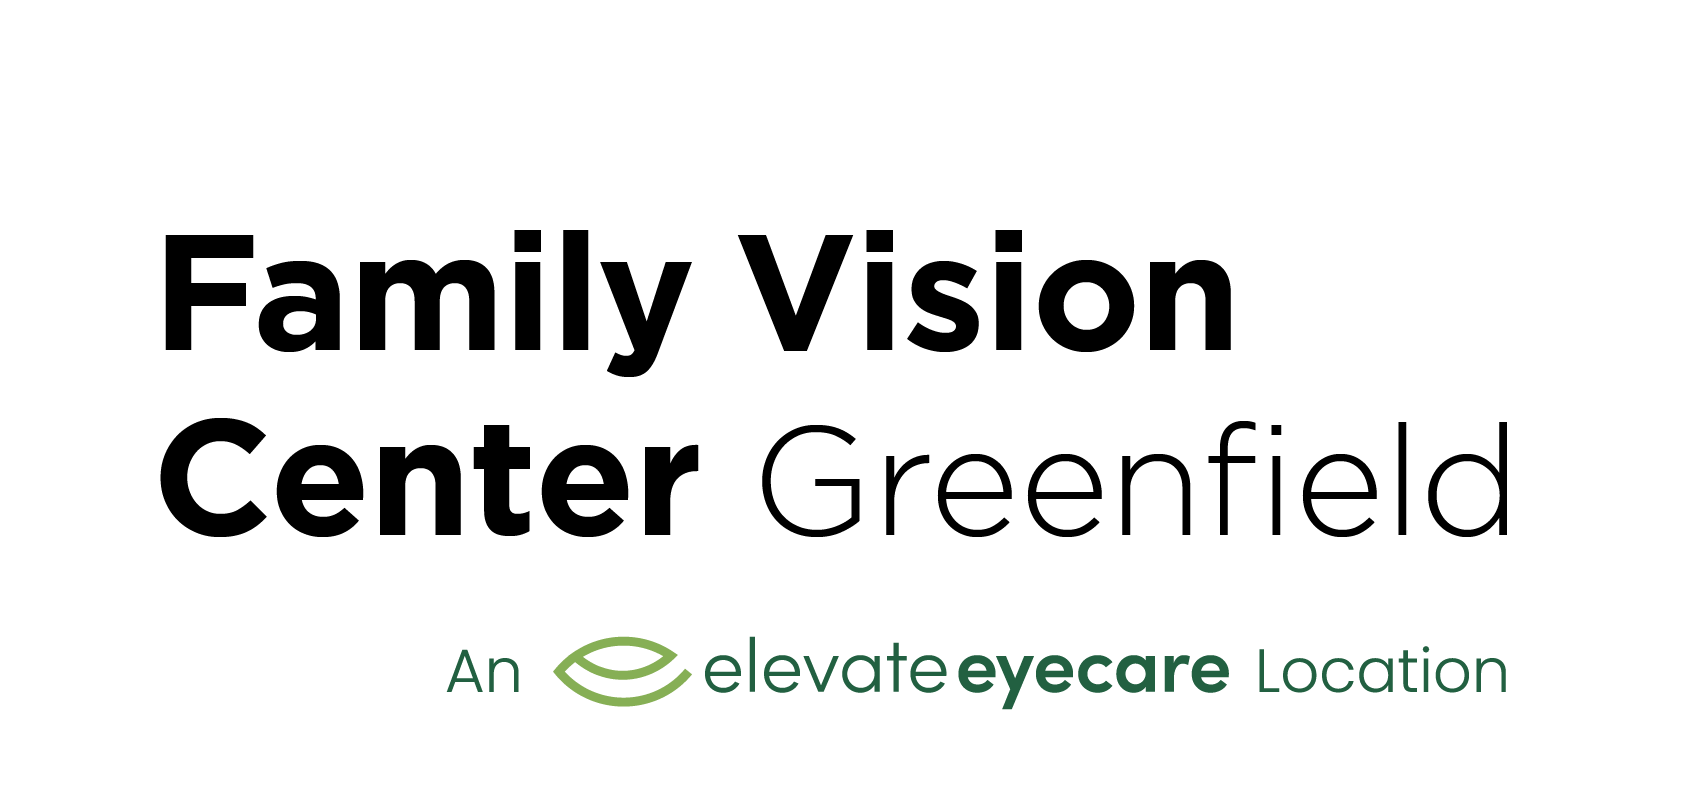 Family Vision Center Greenfield Logo